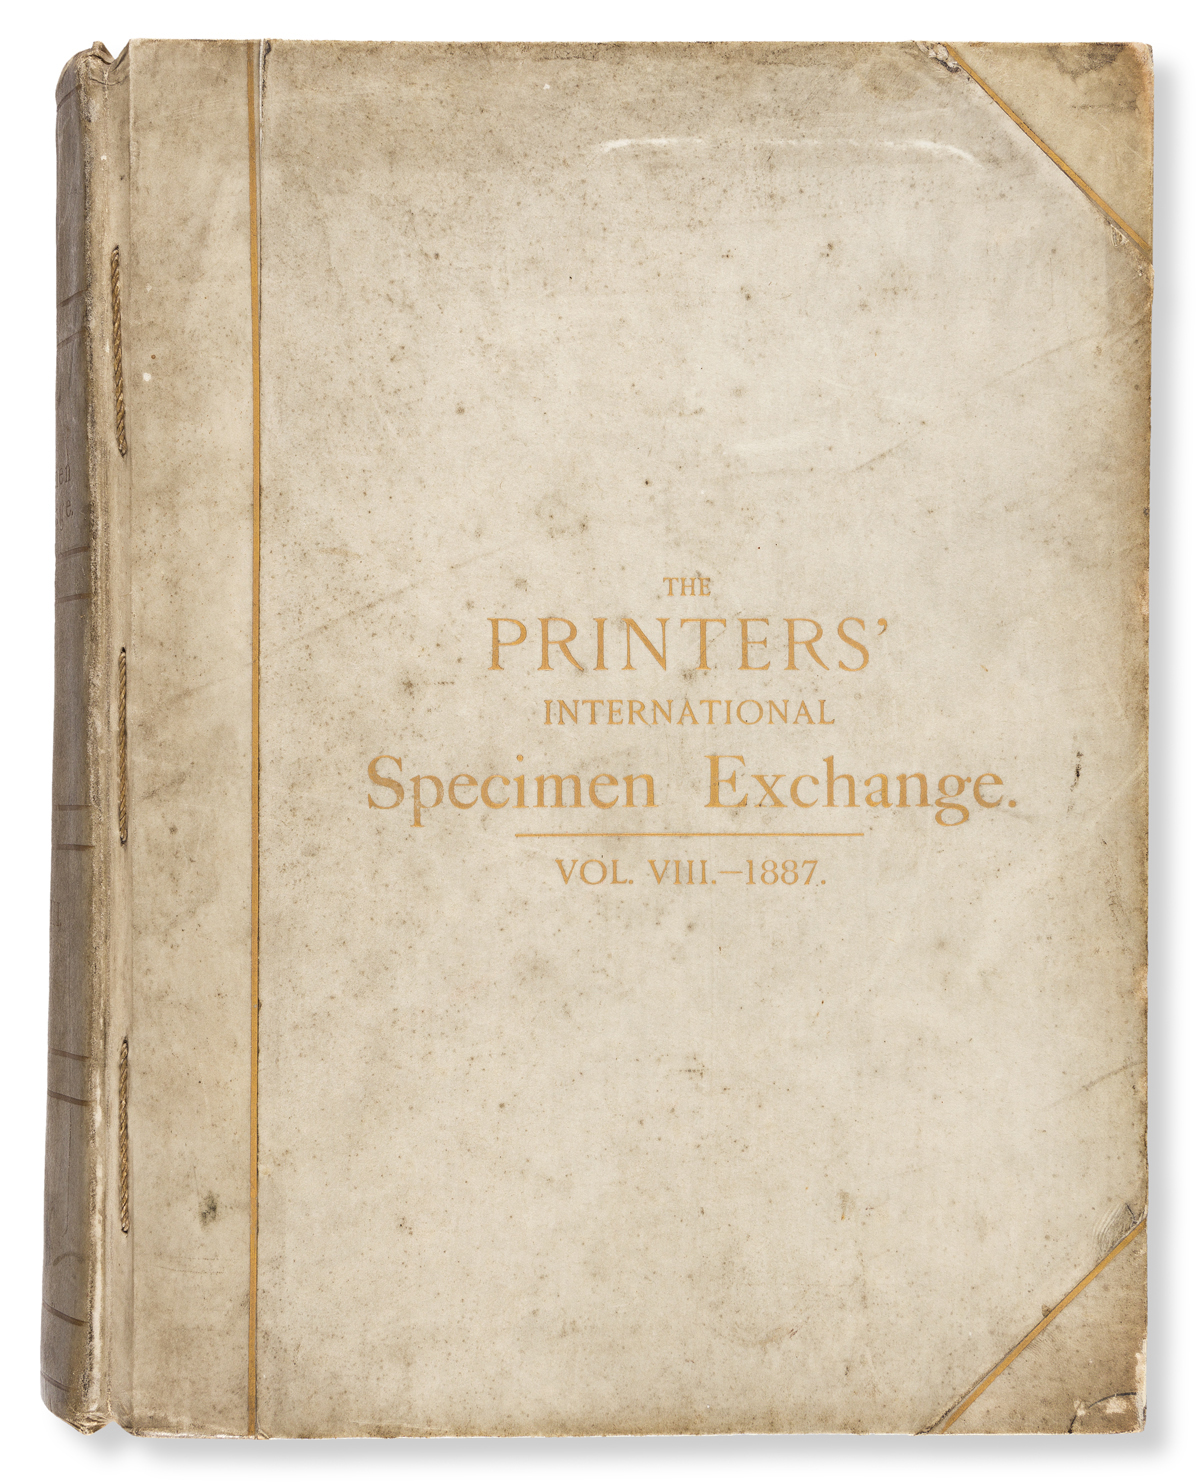 [SPECIMEN BOOK — INTERNATIONAL SPECIMEN EXCHANGE]. The Printers’ International Specimen Exchange: With an Introduction by the Editor of